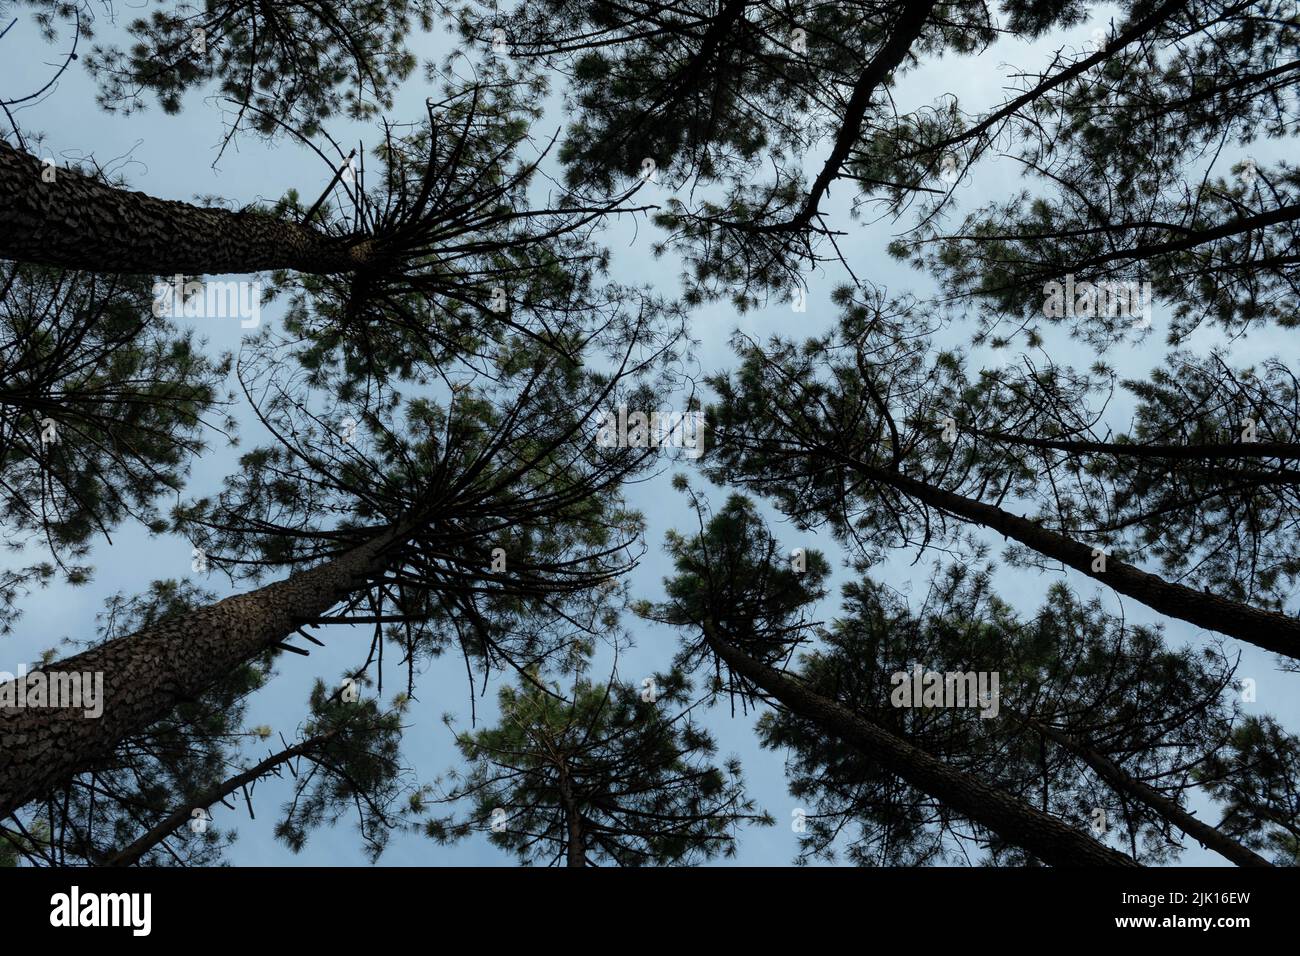 A low angle shot of tall loblolly pine trees under blue sky Stock Photo